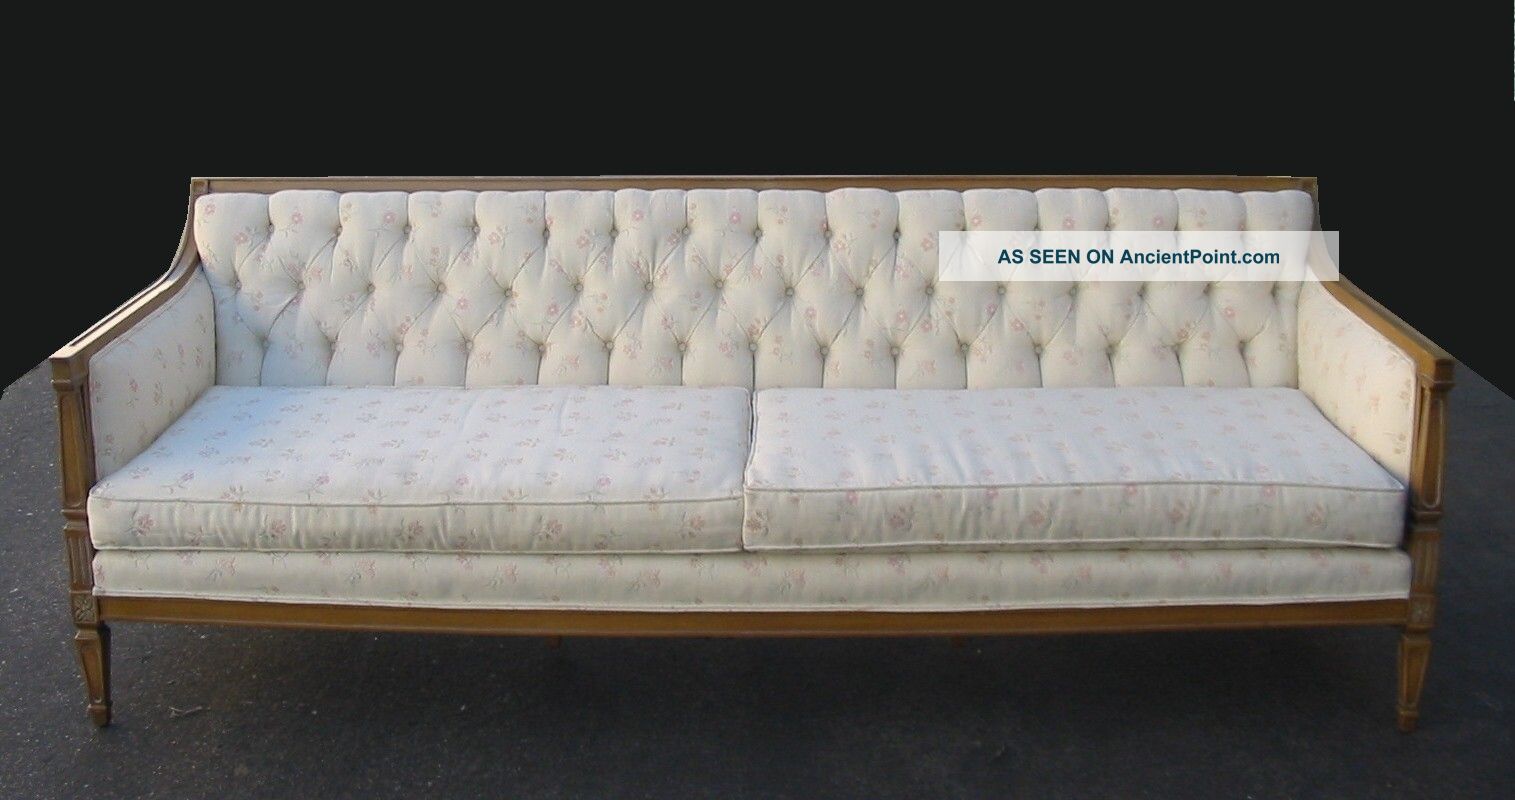 Vintage White French Provincial Tufted Sofa Couch Loveseat Chic Shabby